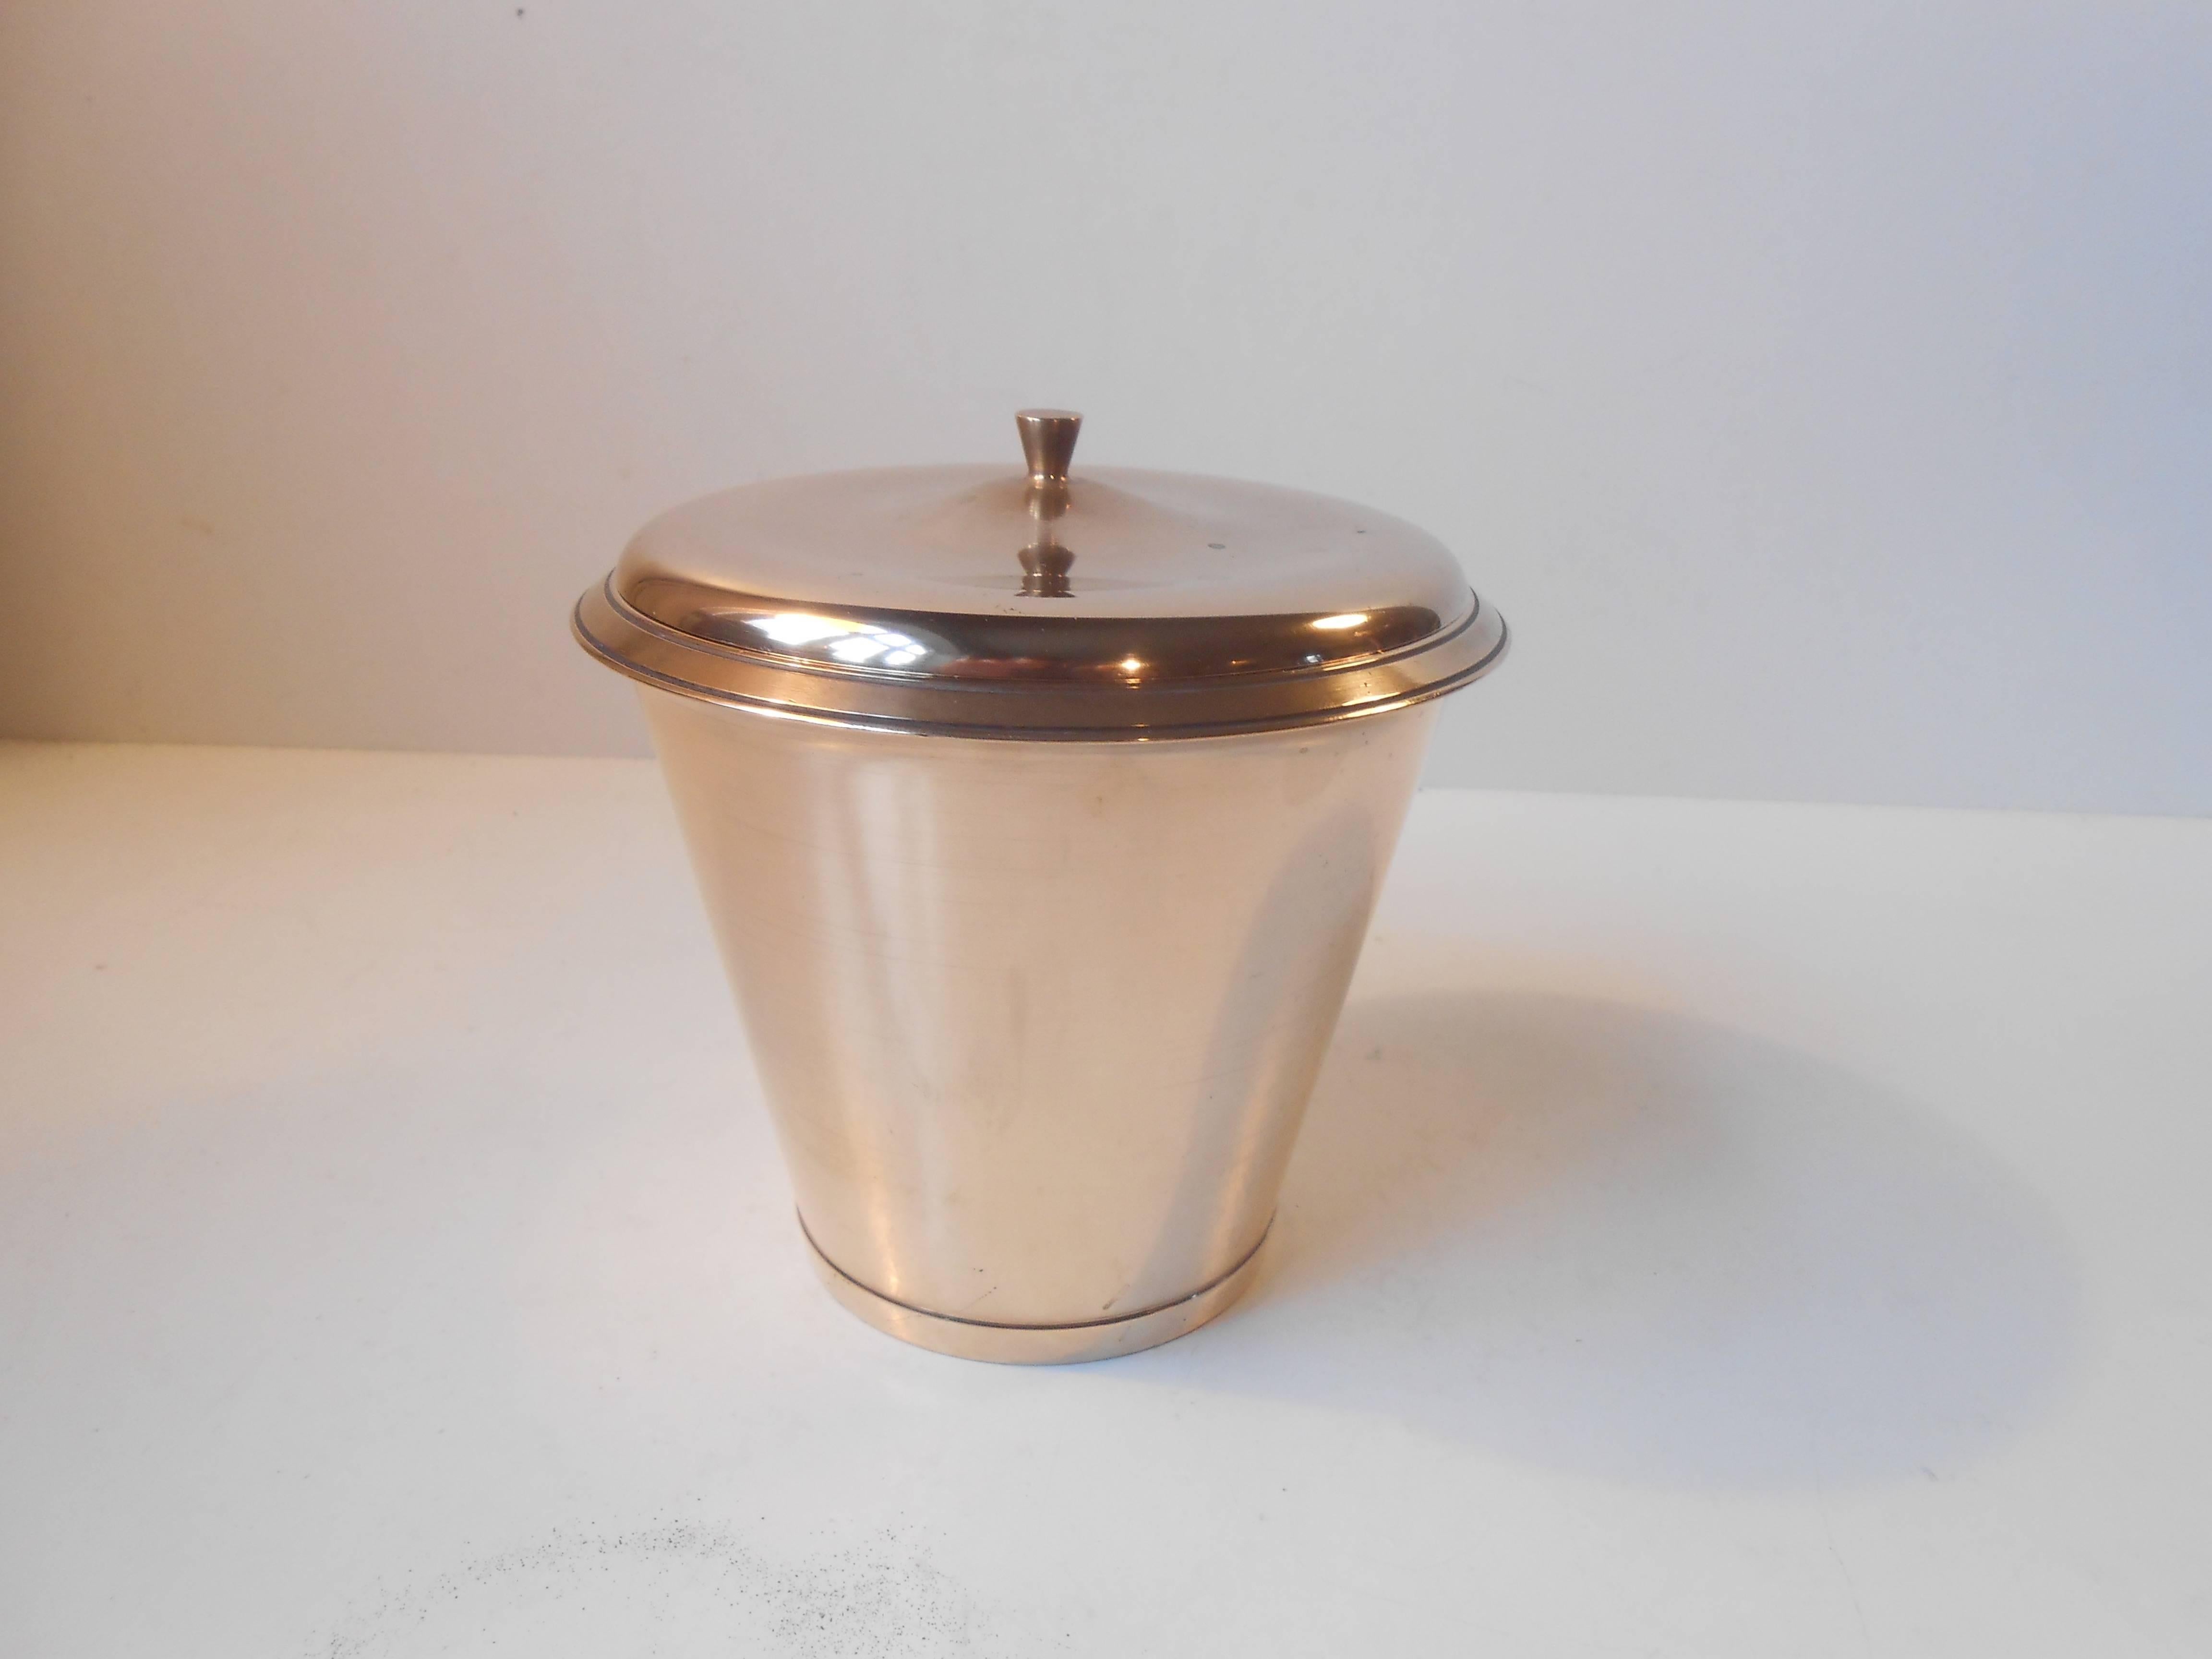 1930s Bronze Jar with an Organic Shape & Danish Art Deco Styling: Stamped ATO 3